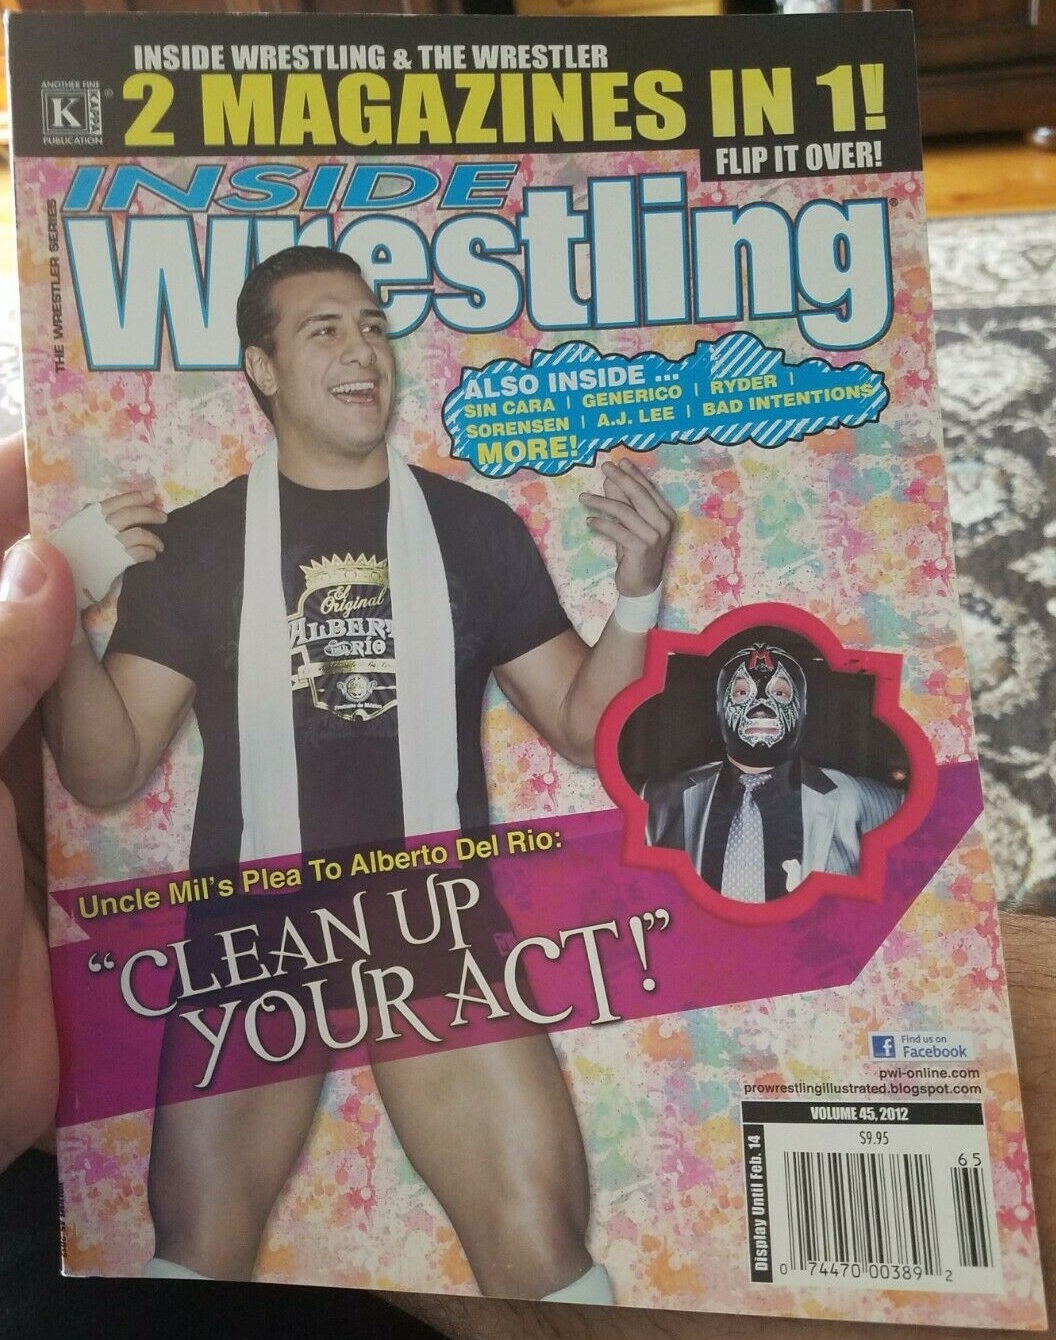 Inside Wrestling February 2012 magazine back issue Inside Wrestling magizine back copy Inside Wrestling February 2012 Magazine Back Issue Published by The Wrestling Federation, WWE & WWF. Uncle Mil's plea to Alberto Del Rio: clean up your act!.